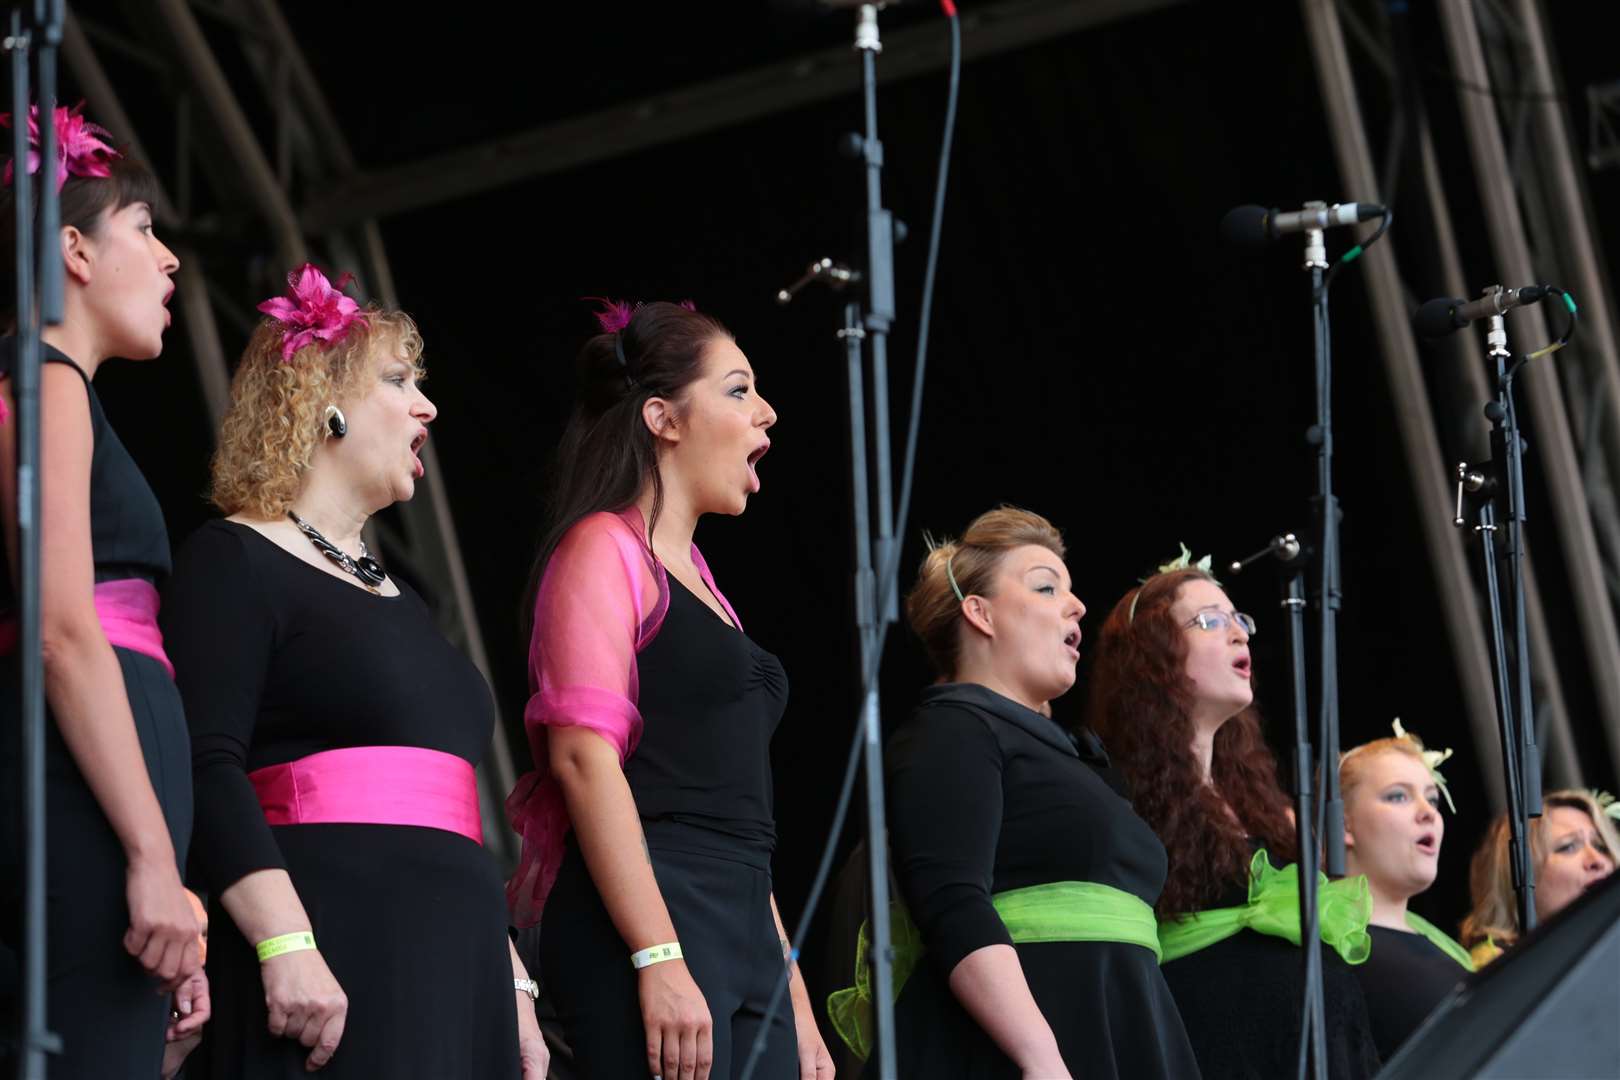 The P & O Ferries Choir at last year's event